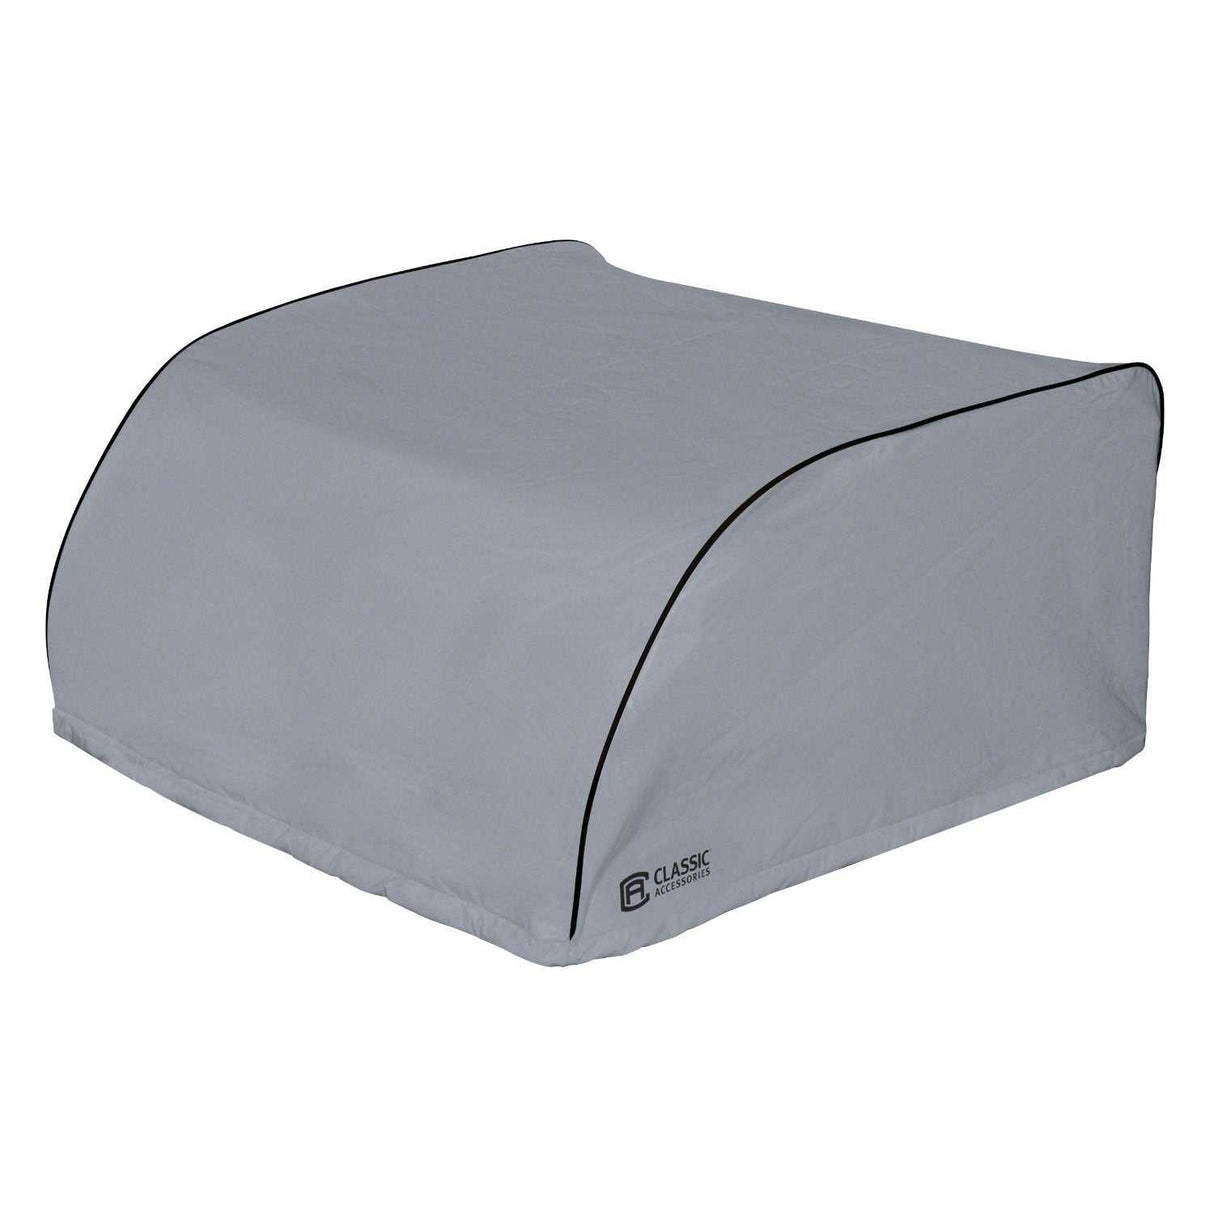 80-227-191001-00 Air Conditioner Cover